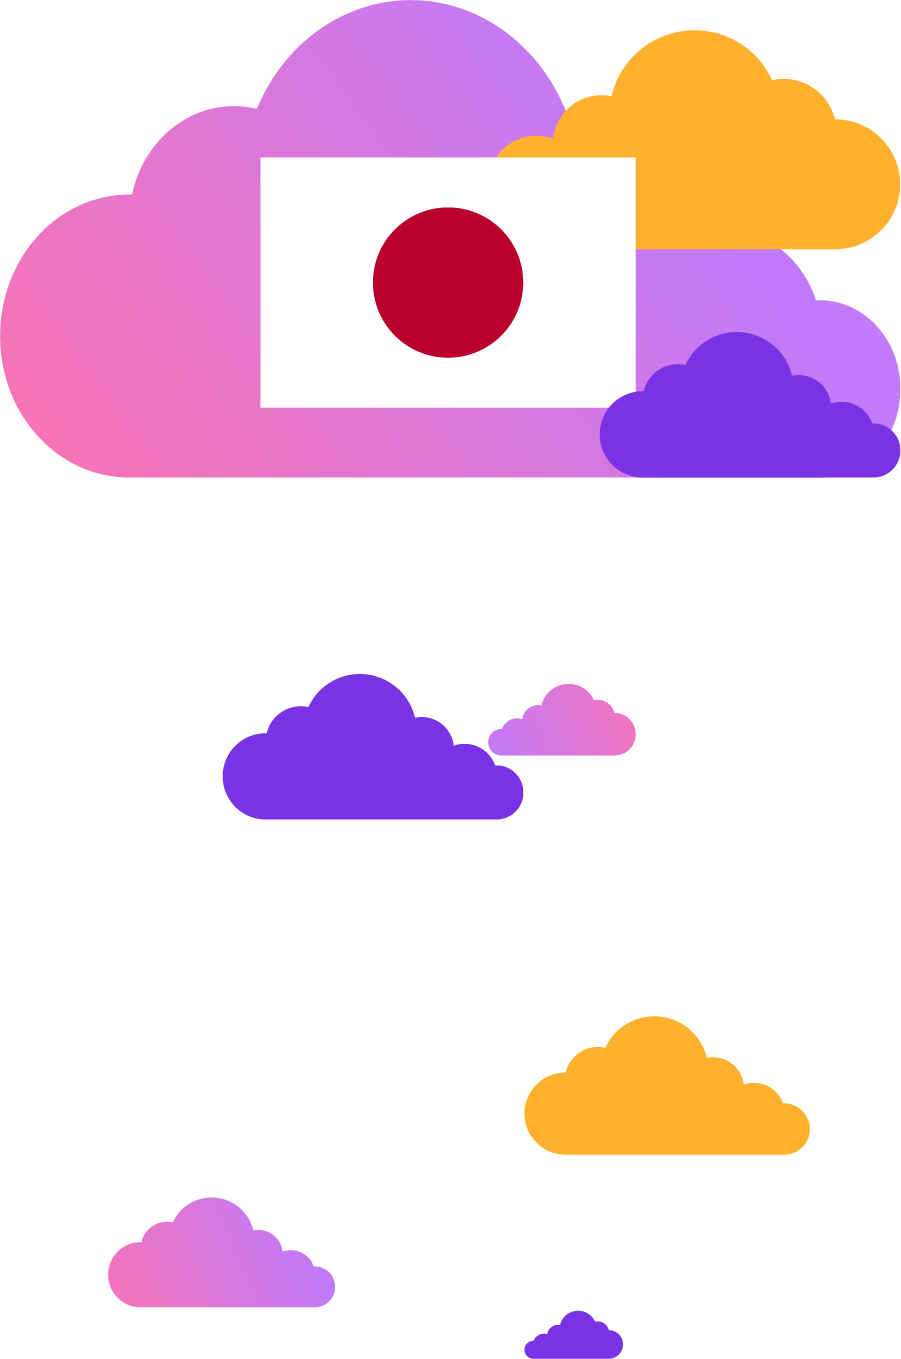 Japanese flag on top of colorful clouds